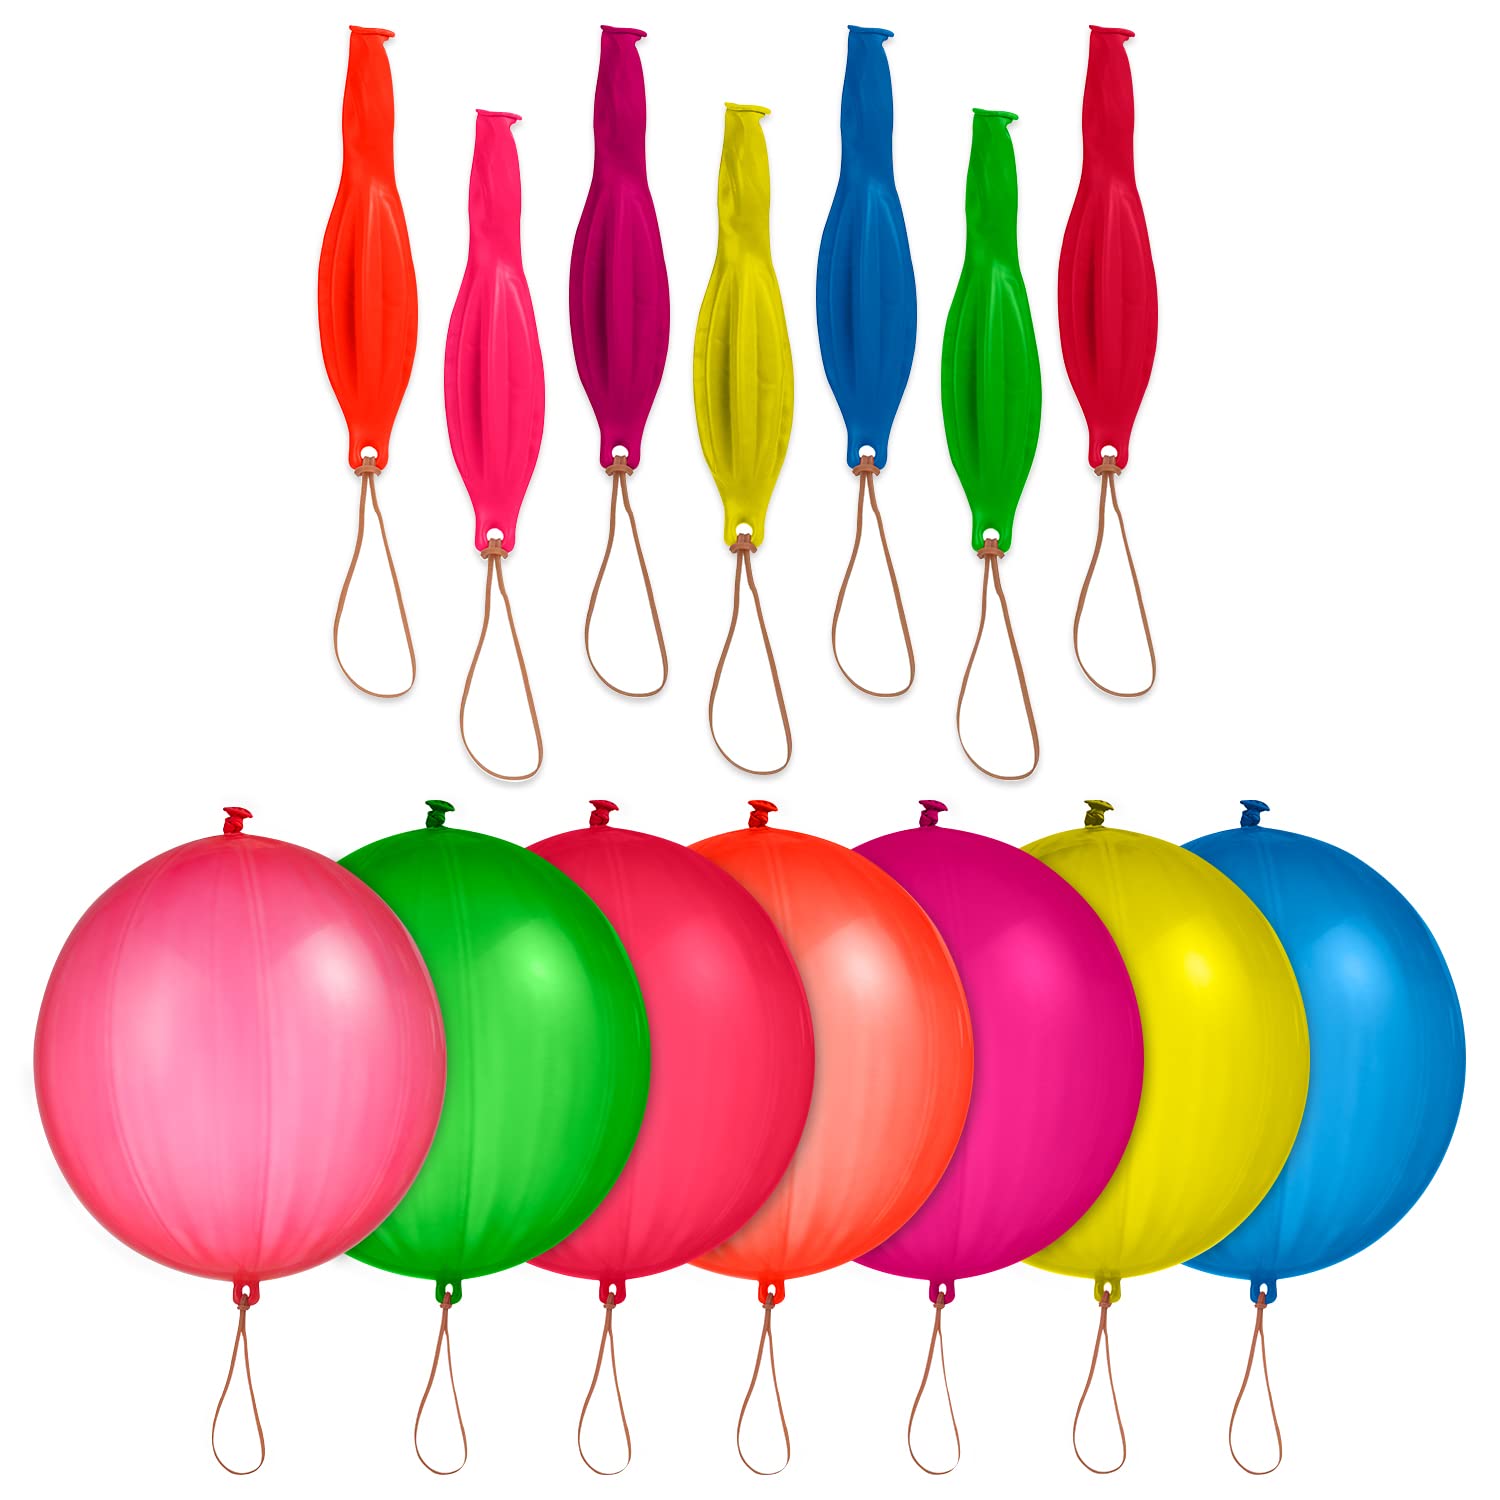 50 Pack Punch Balloons | Mega Bulk Pack of Neon Assorted Color Punch Balloons that Measure 18 Inches.